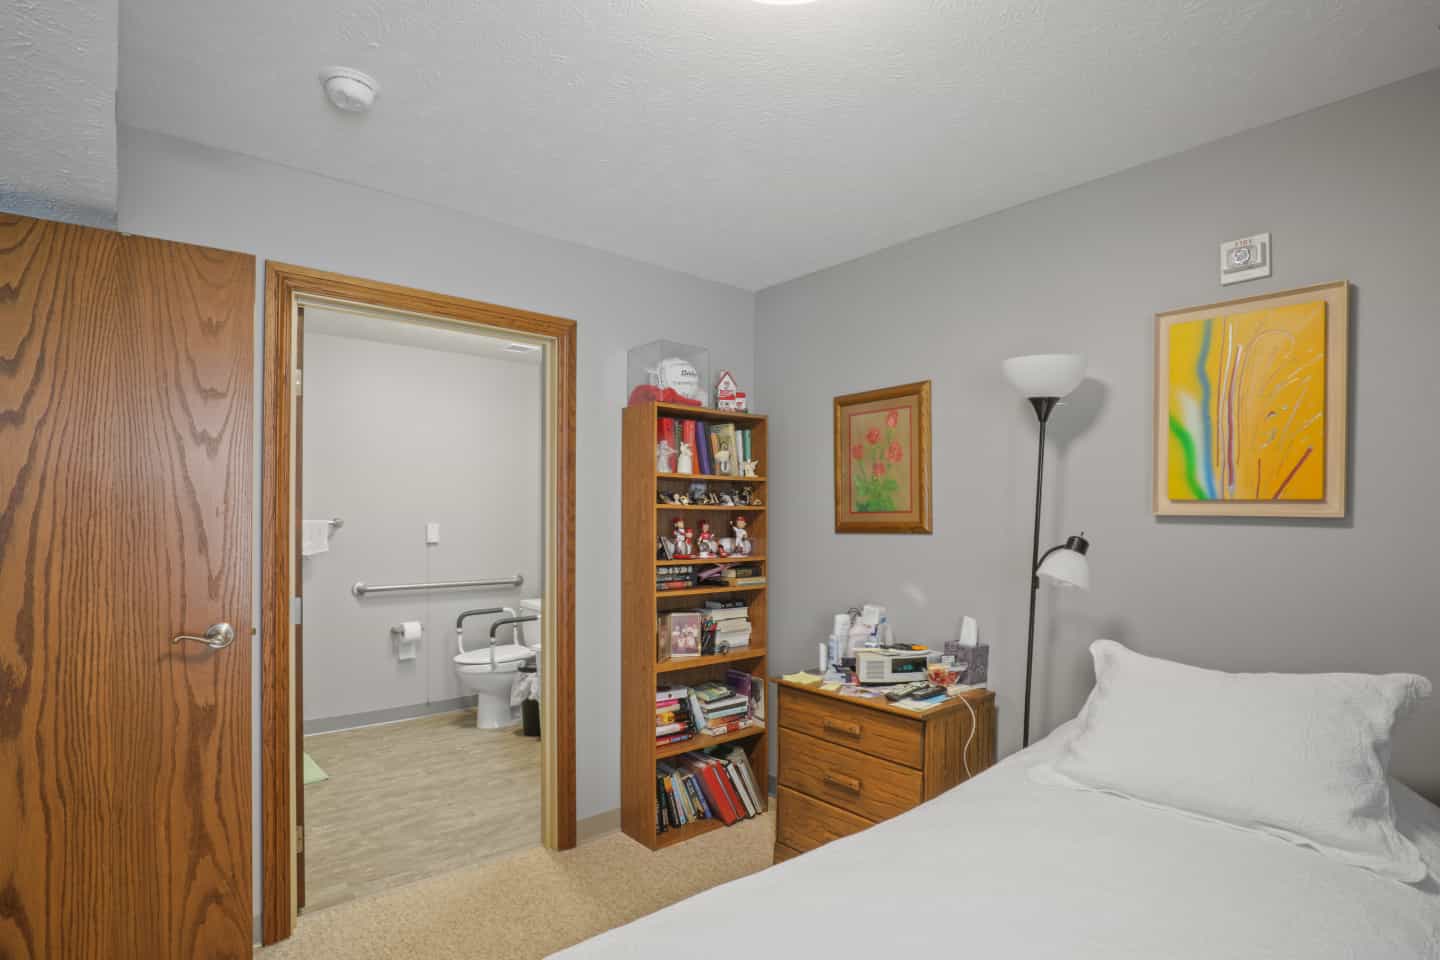 Assisted Living - One Bedroom Bedroom